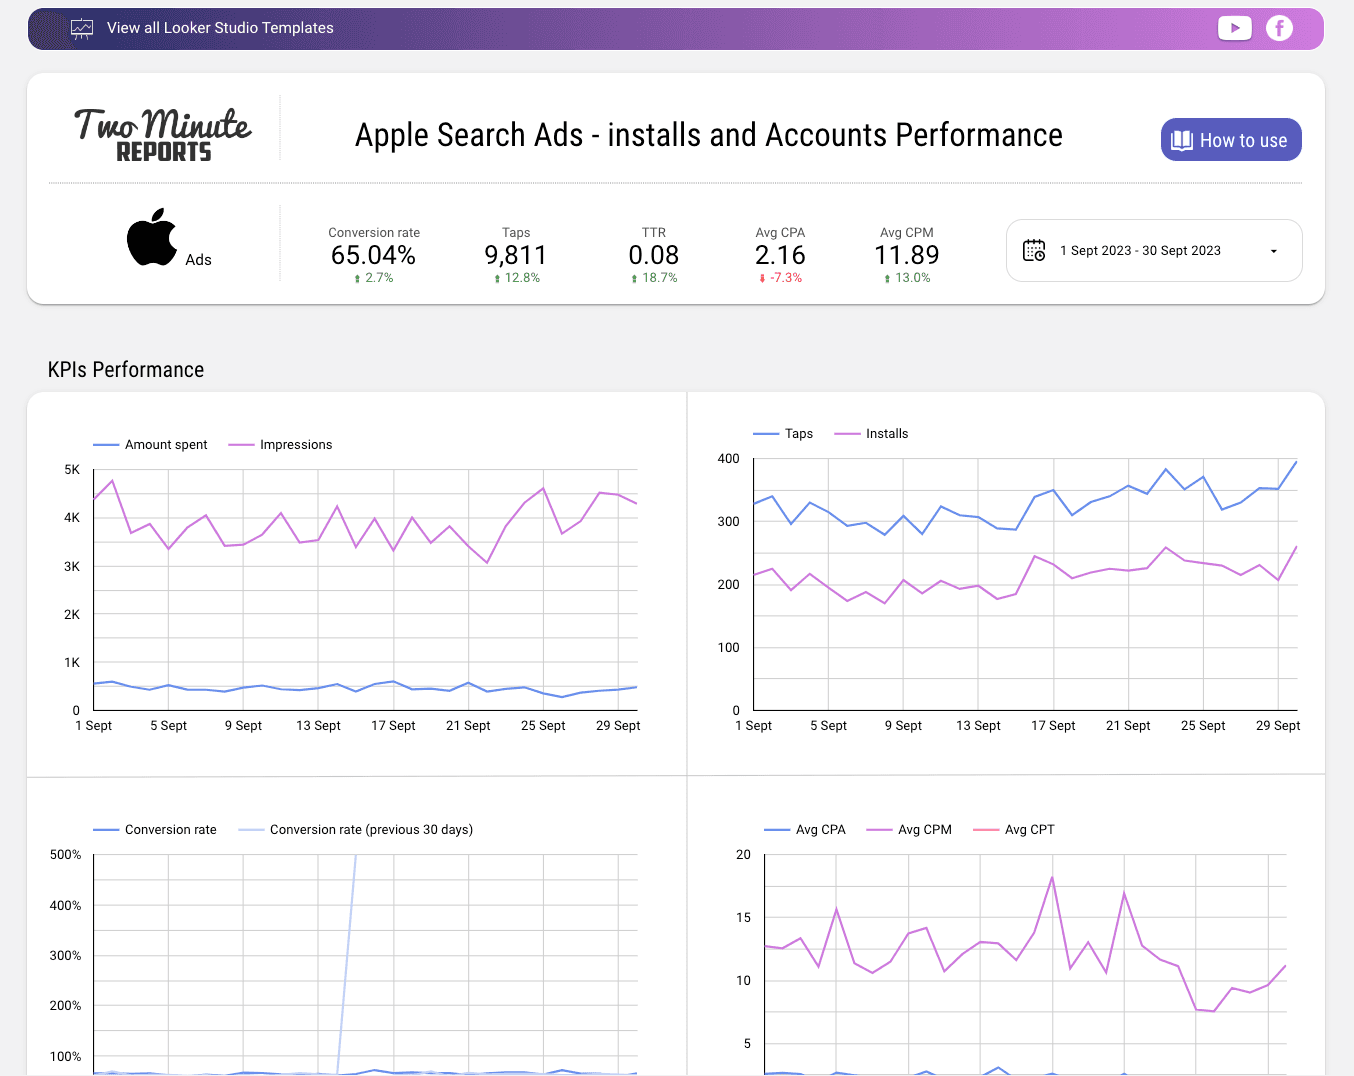 Apple Search Ads - installs and Accounts Performance